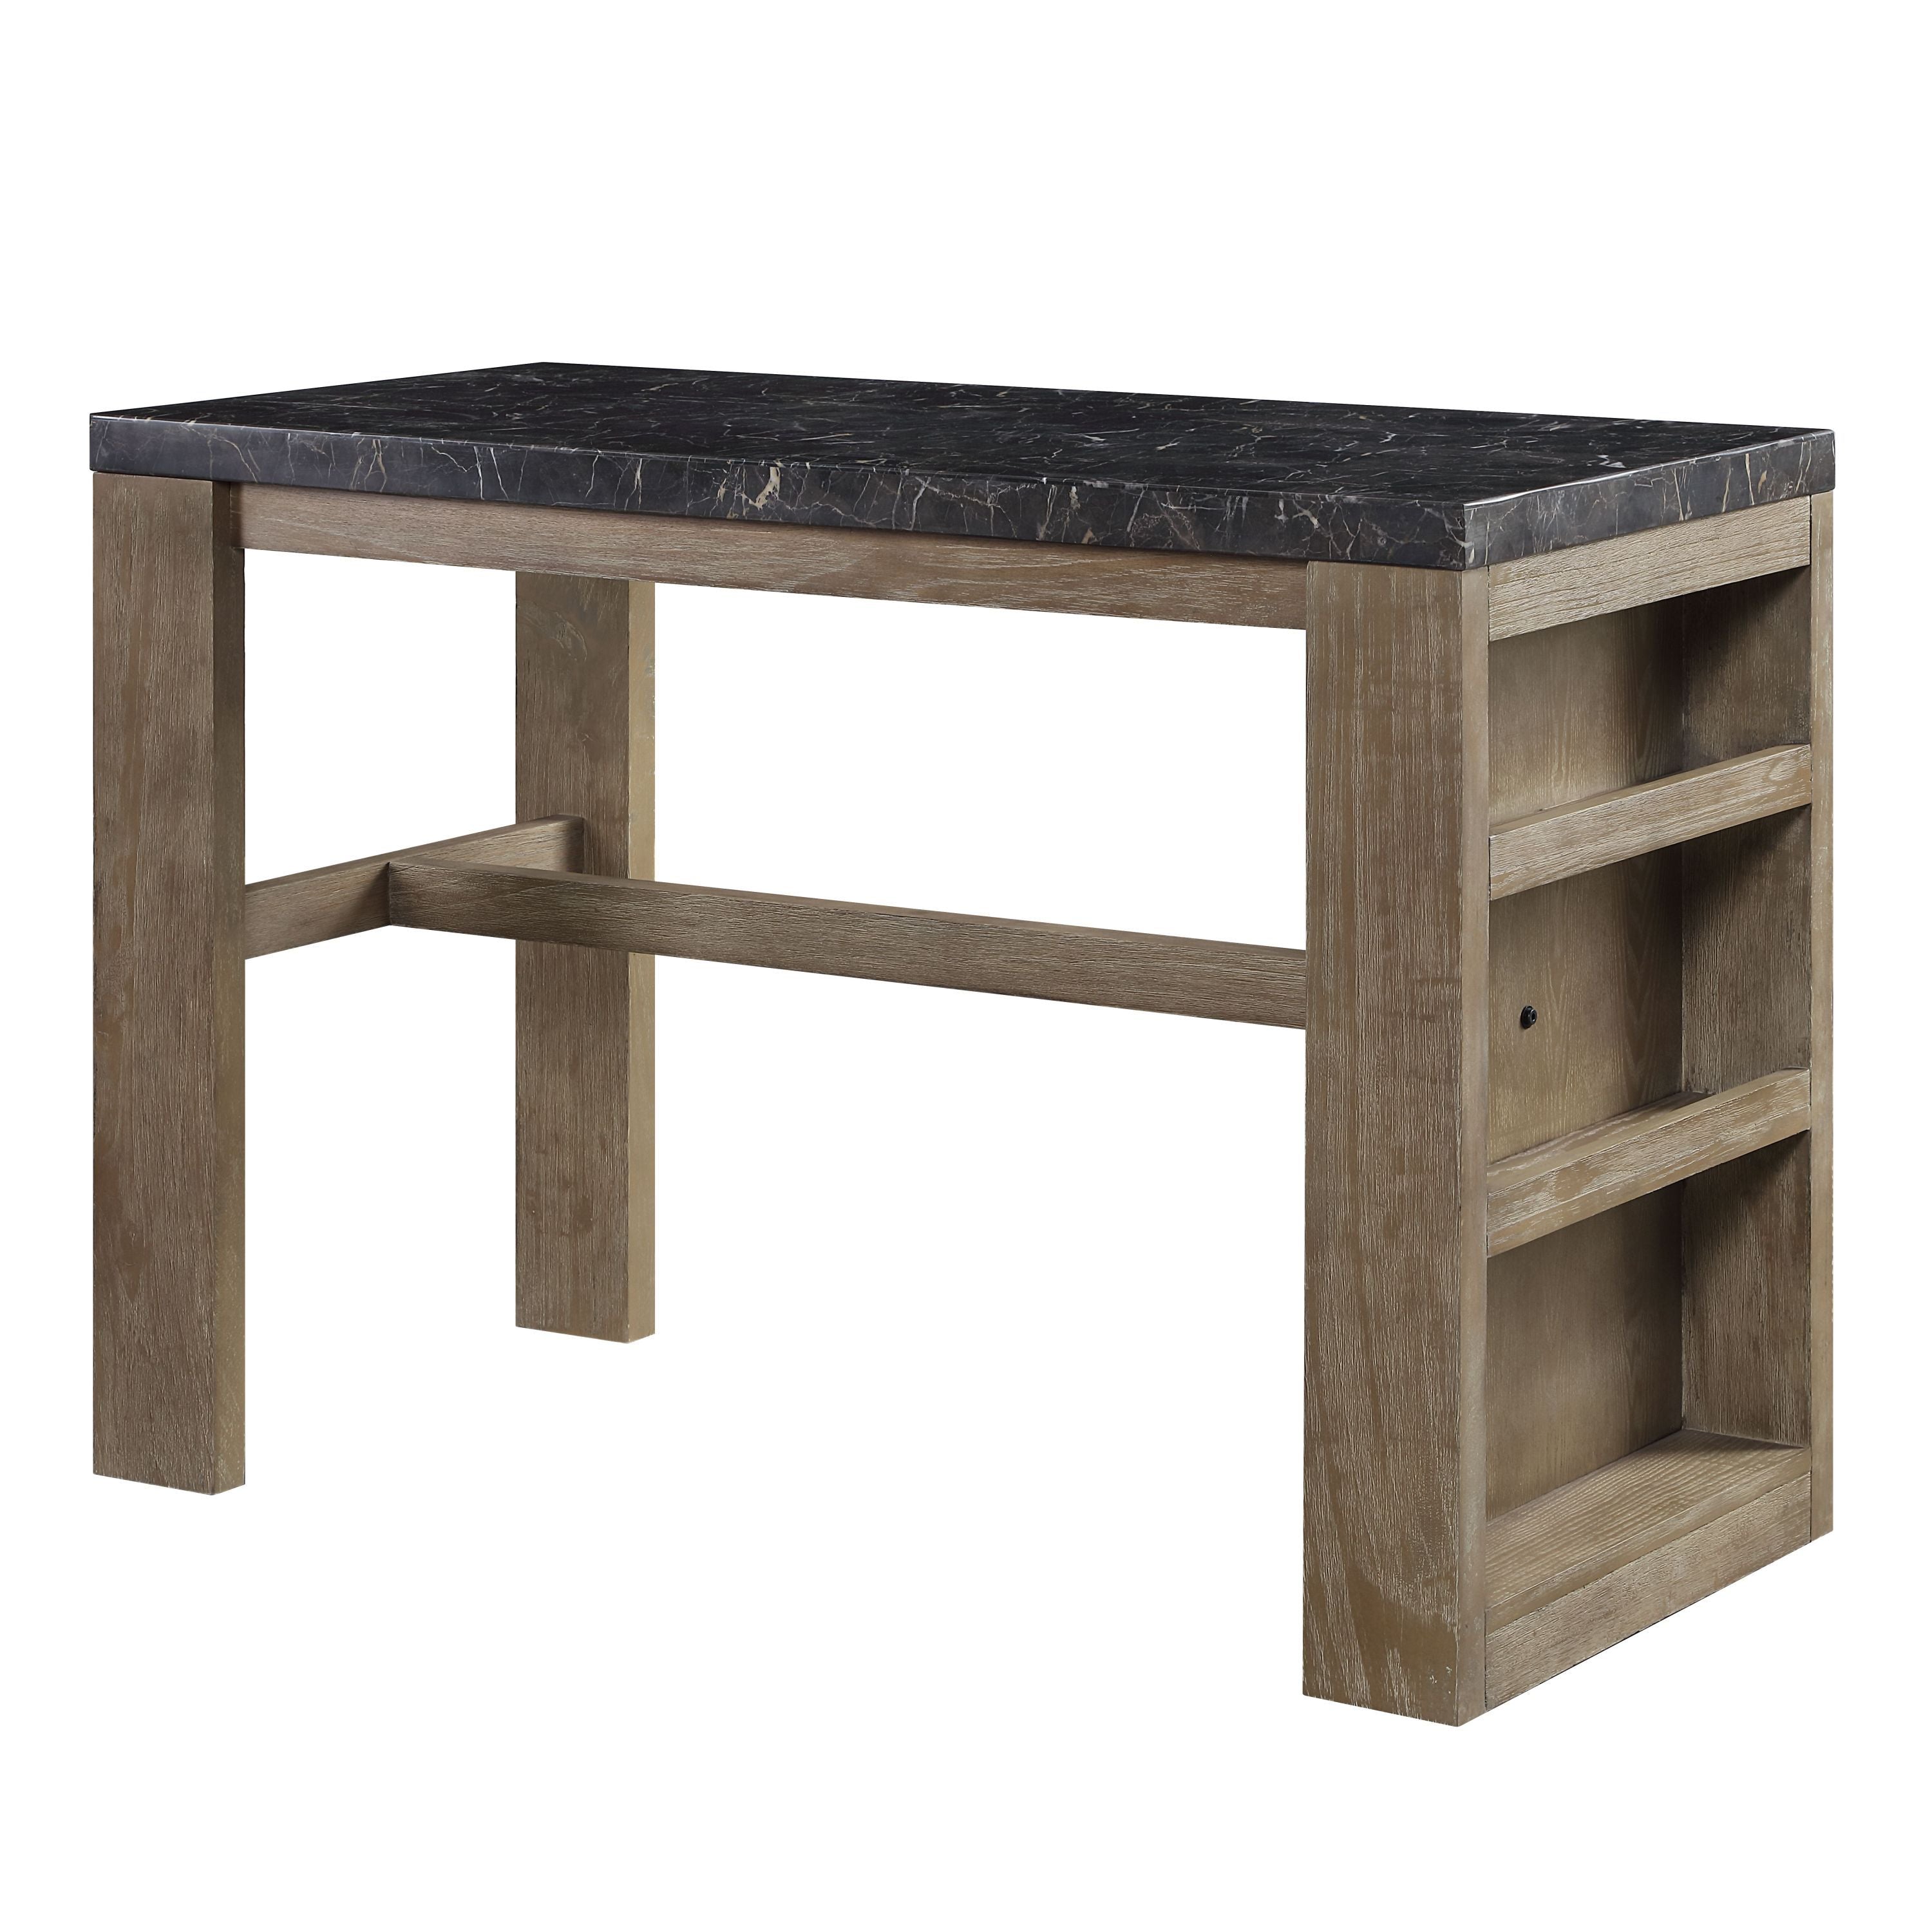 ACME Charnell Counter Heigh Table  in Marble & Oak Finish DN00551